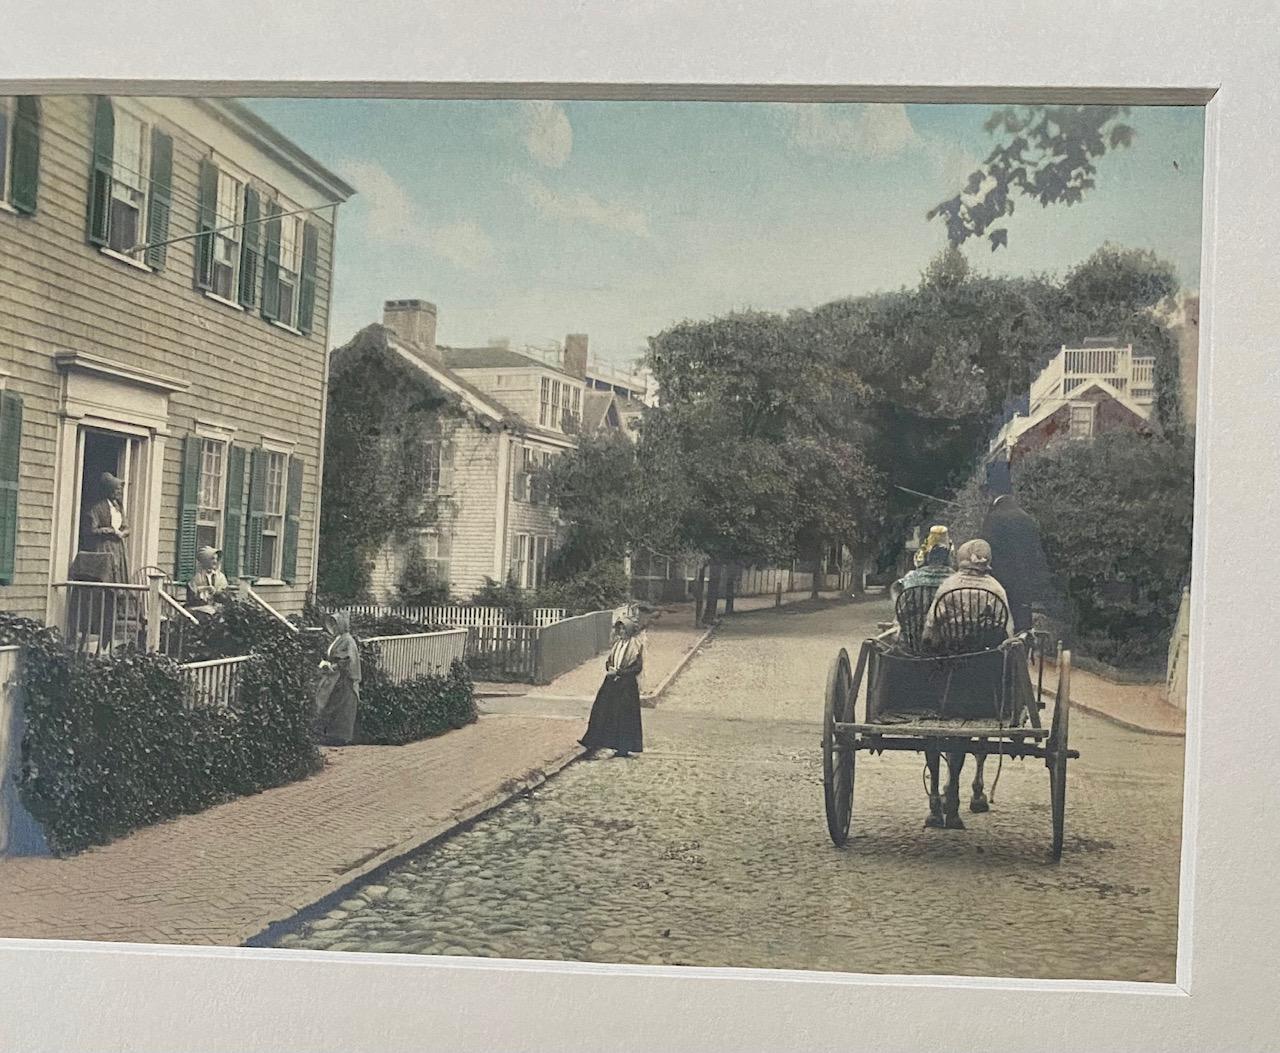 Antique Hand Colored Photograph of Nantucket Street Scene by Marshall Gardiner (1884-1942), circa 1910, a period hand tinted photograph entitled 